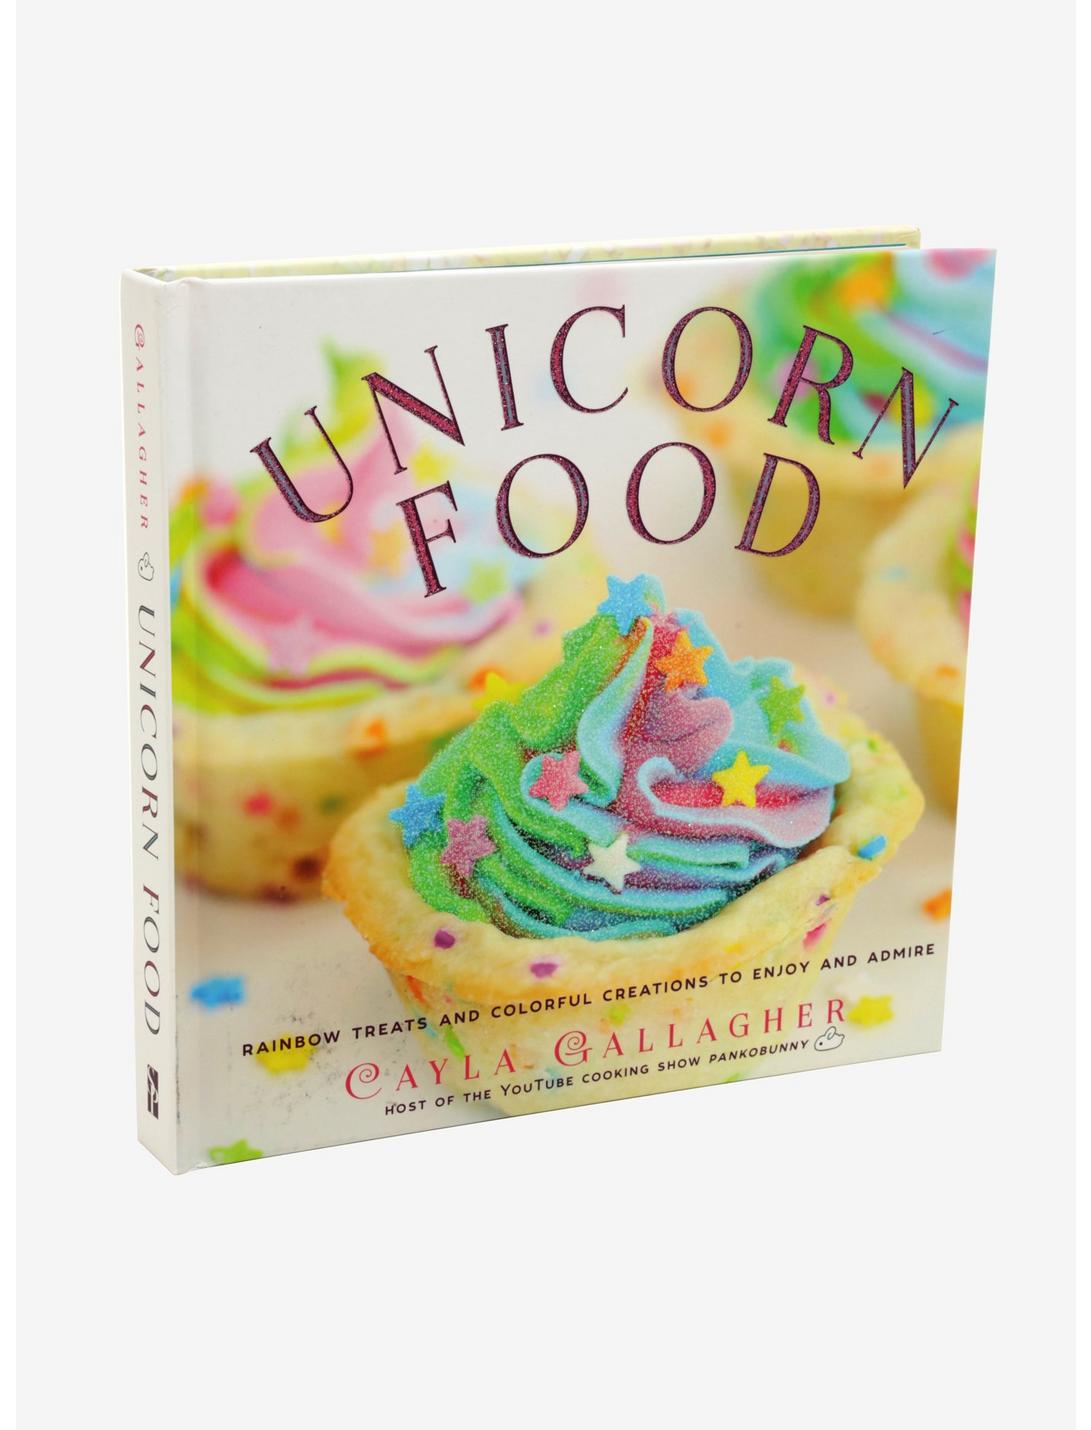 Unicorn Food: Rainbow Treats And Colorful Creations To Enjoy And Admire, , hi-res